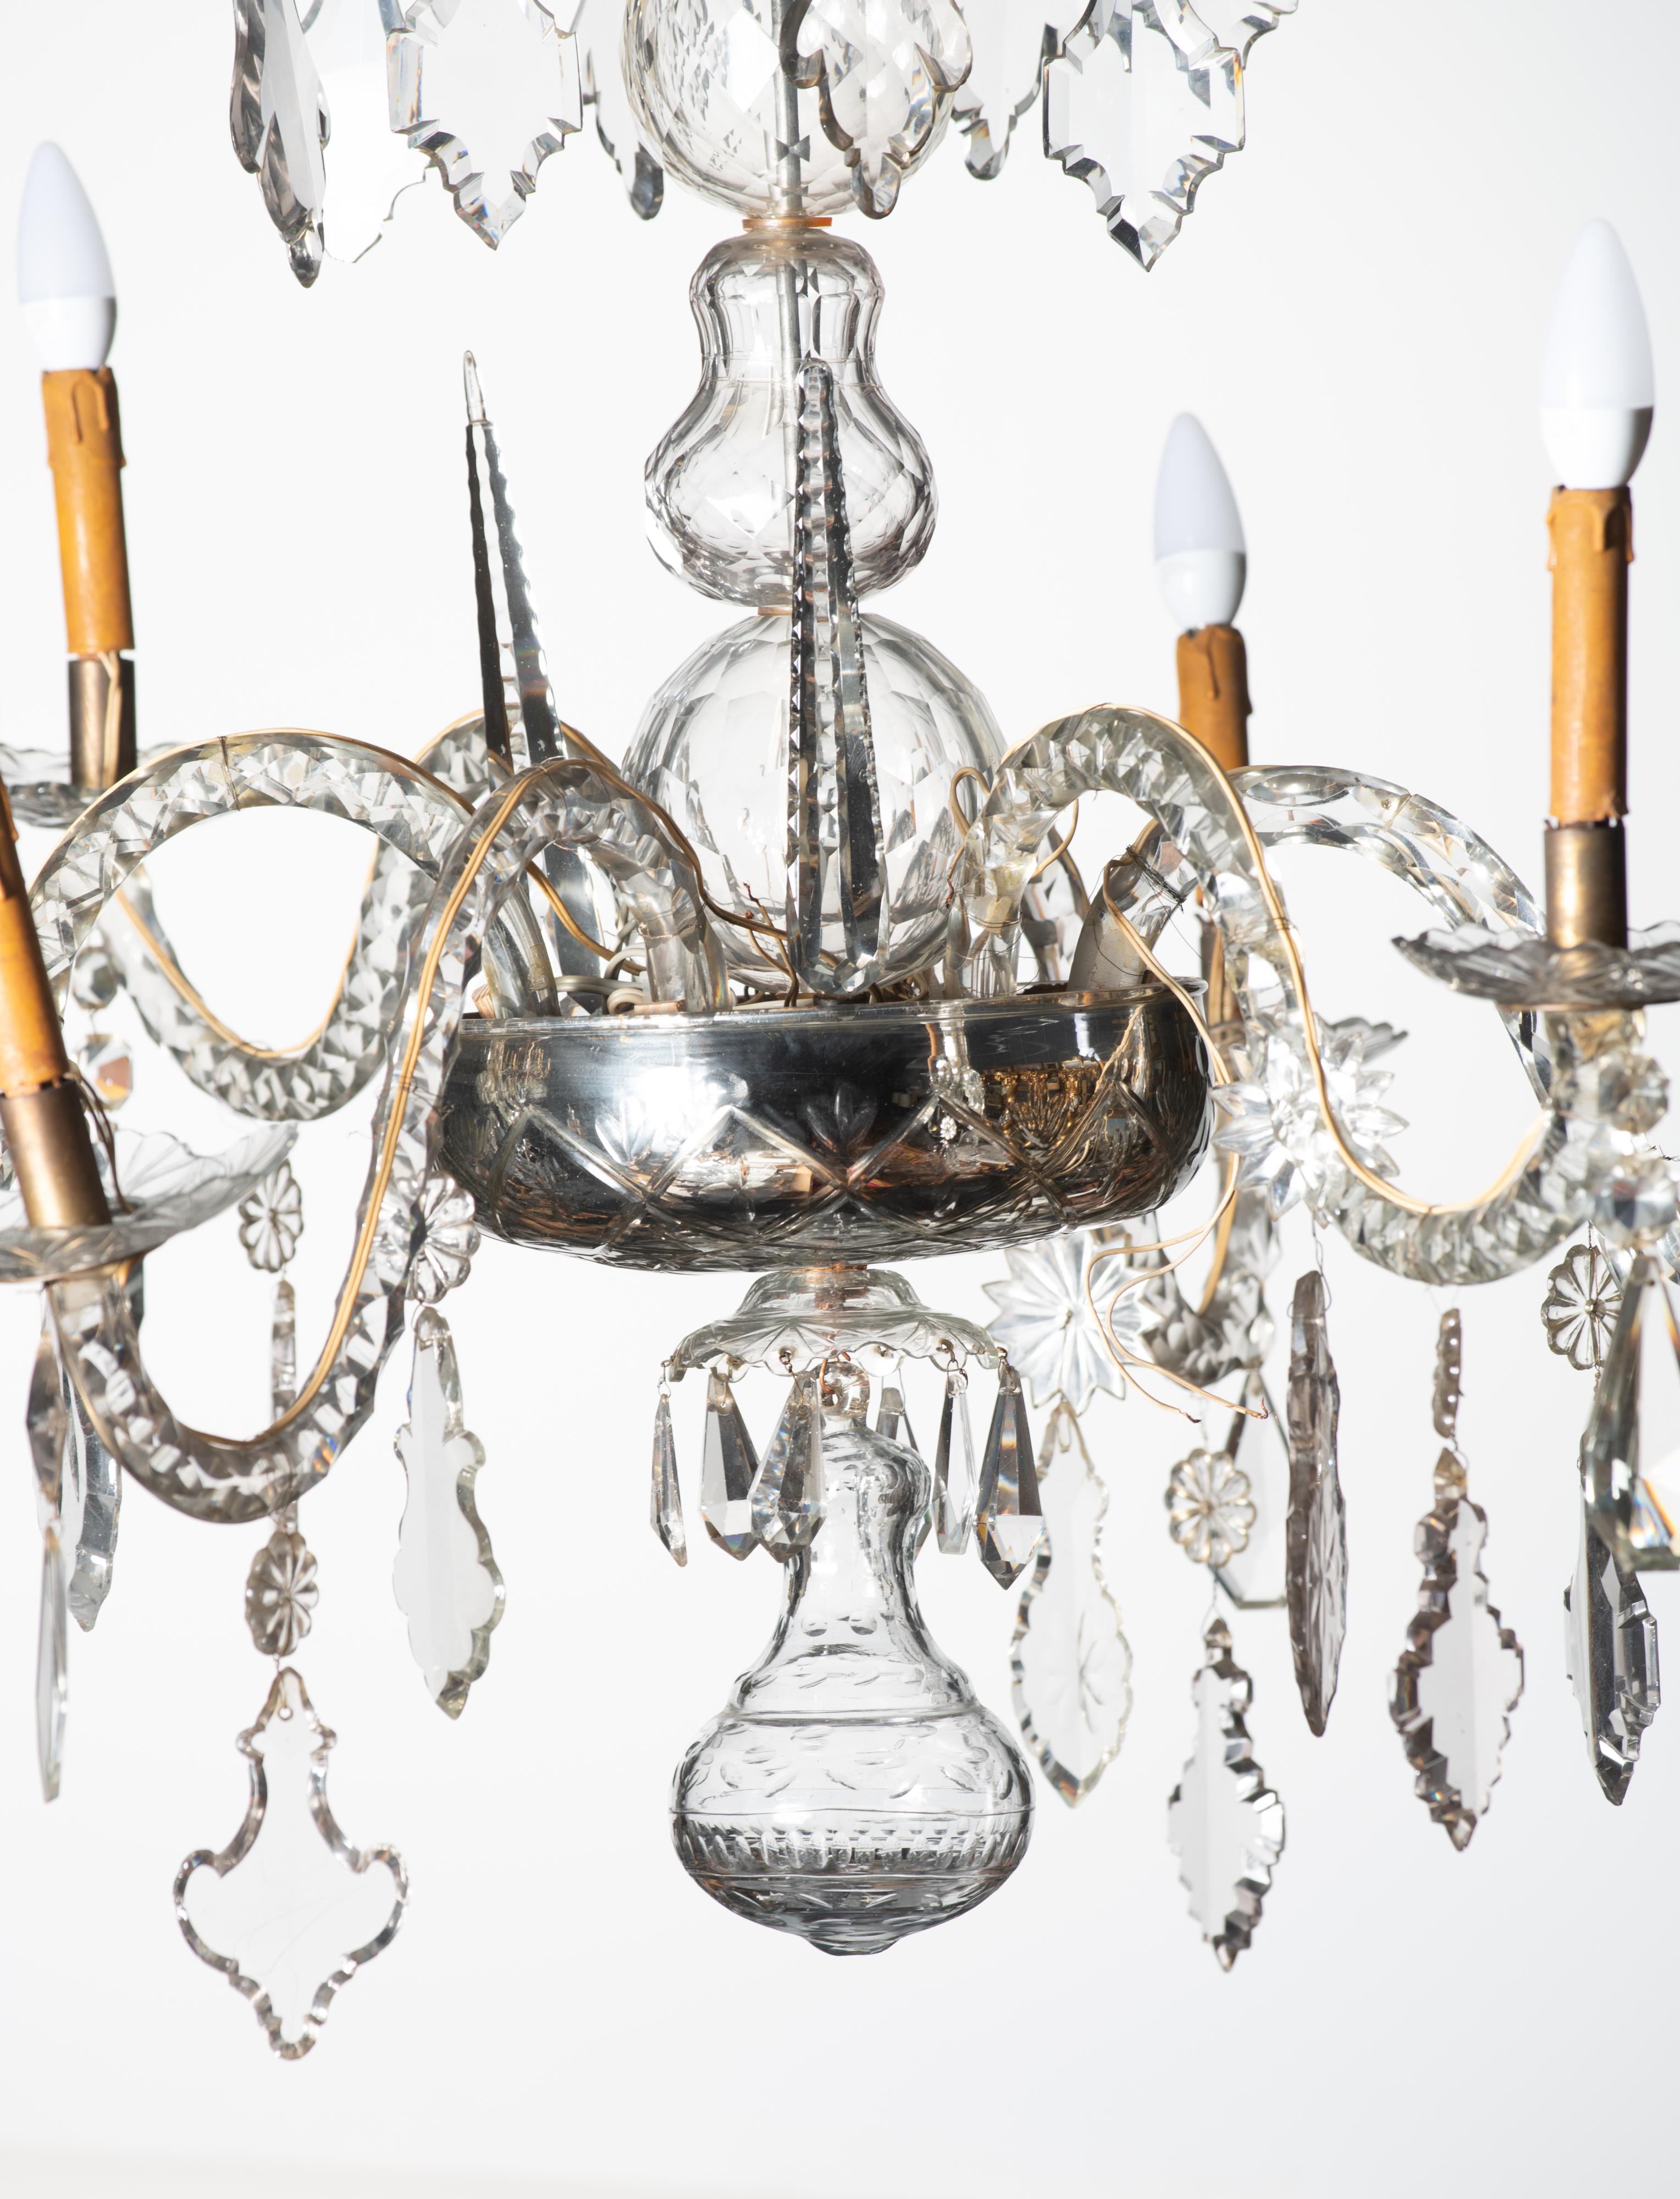 An imposing six-armed Venetian type glass chandelier, H 80 - › 107 cm, - Image 2 of 6